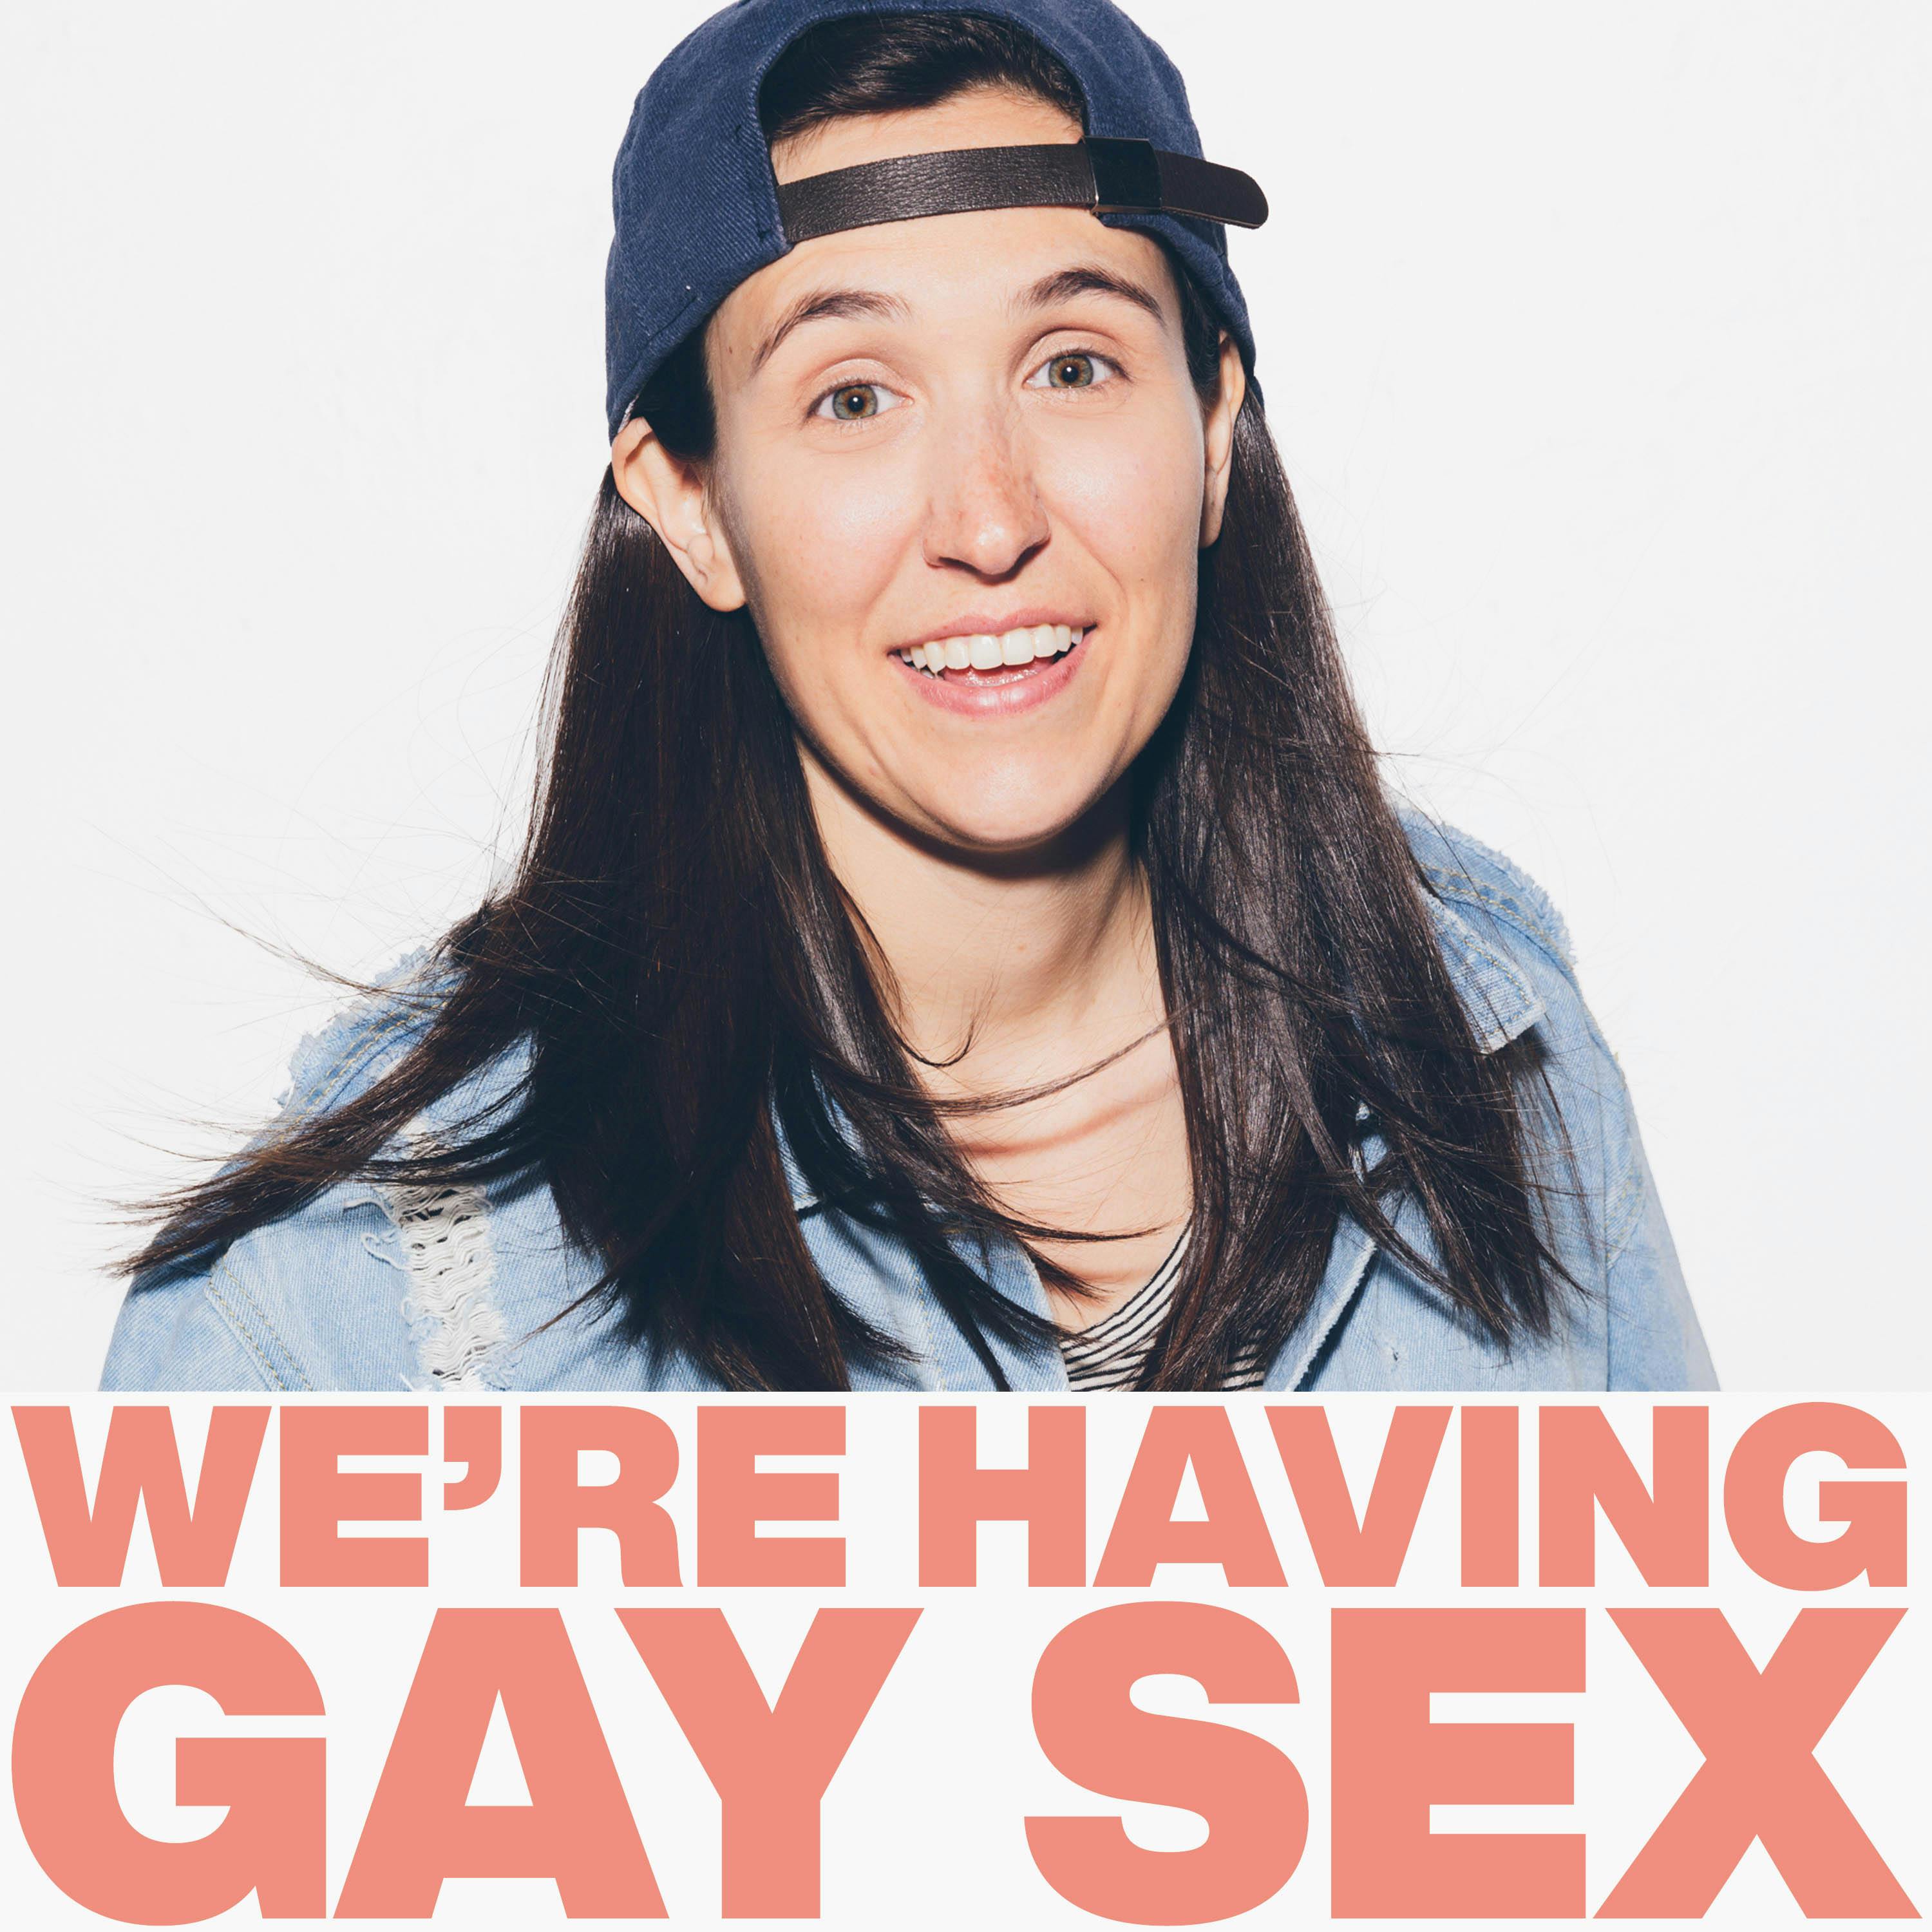 We're Having Gay Sex - Jessica Kirson is Building a Gay Dynasty